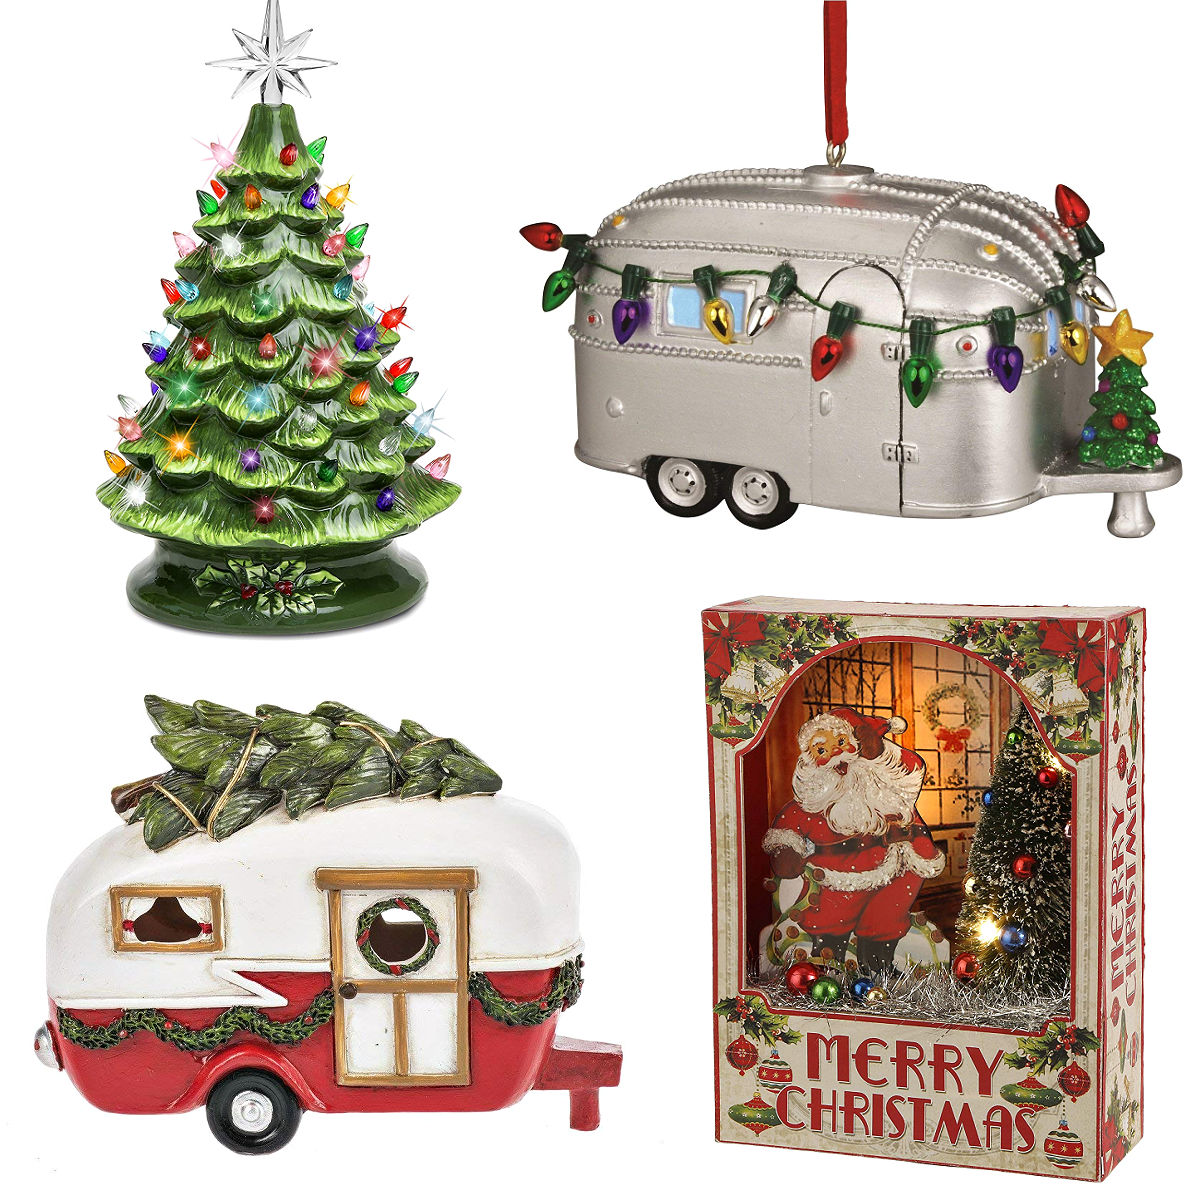 Buying Reproduction Vintage Christmas Decorations - House of Hawthornes